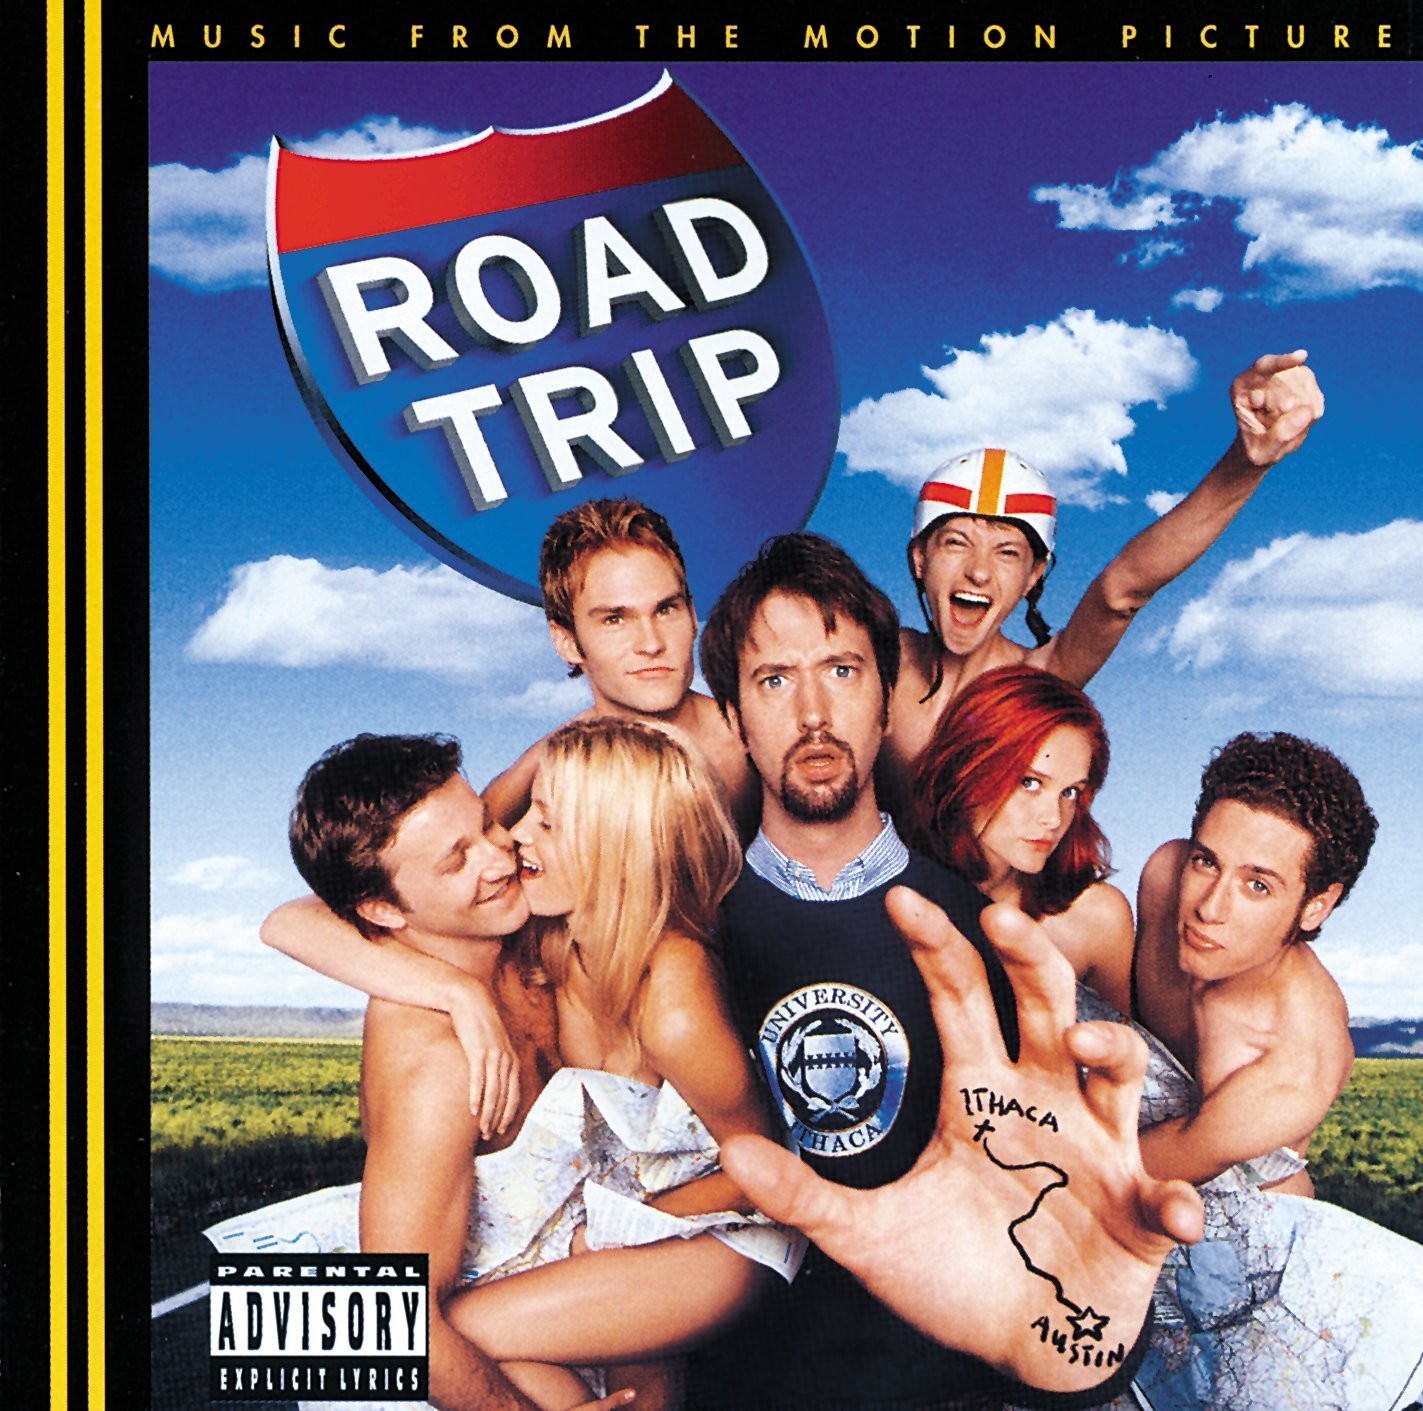 road trip soundtrack songs